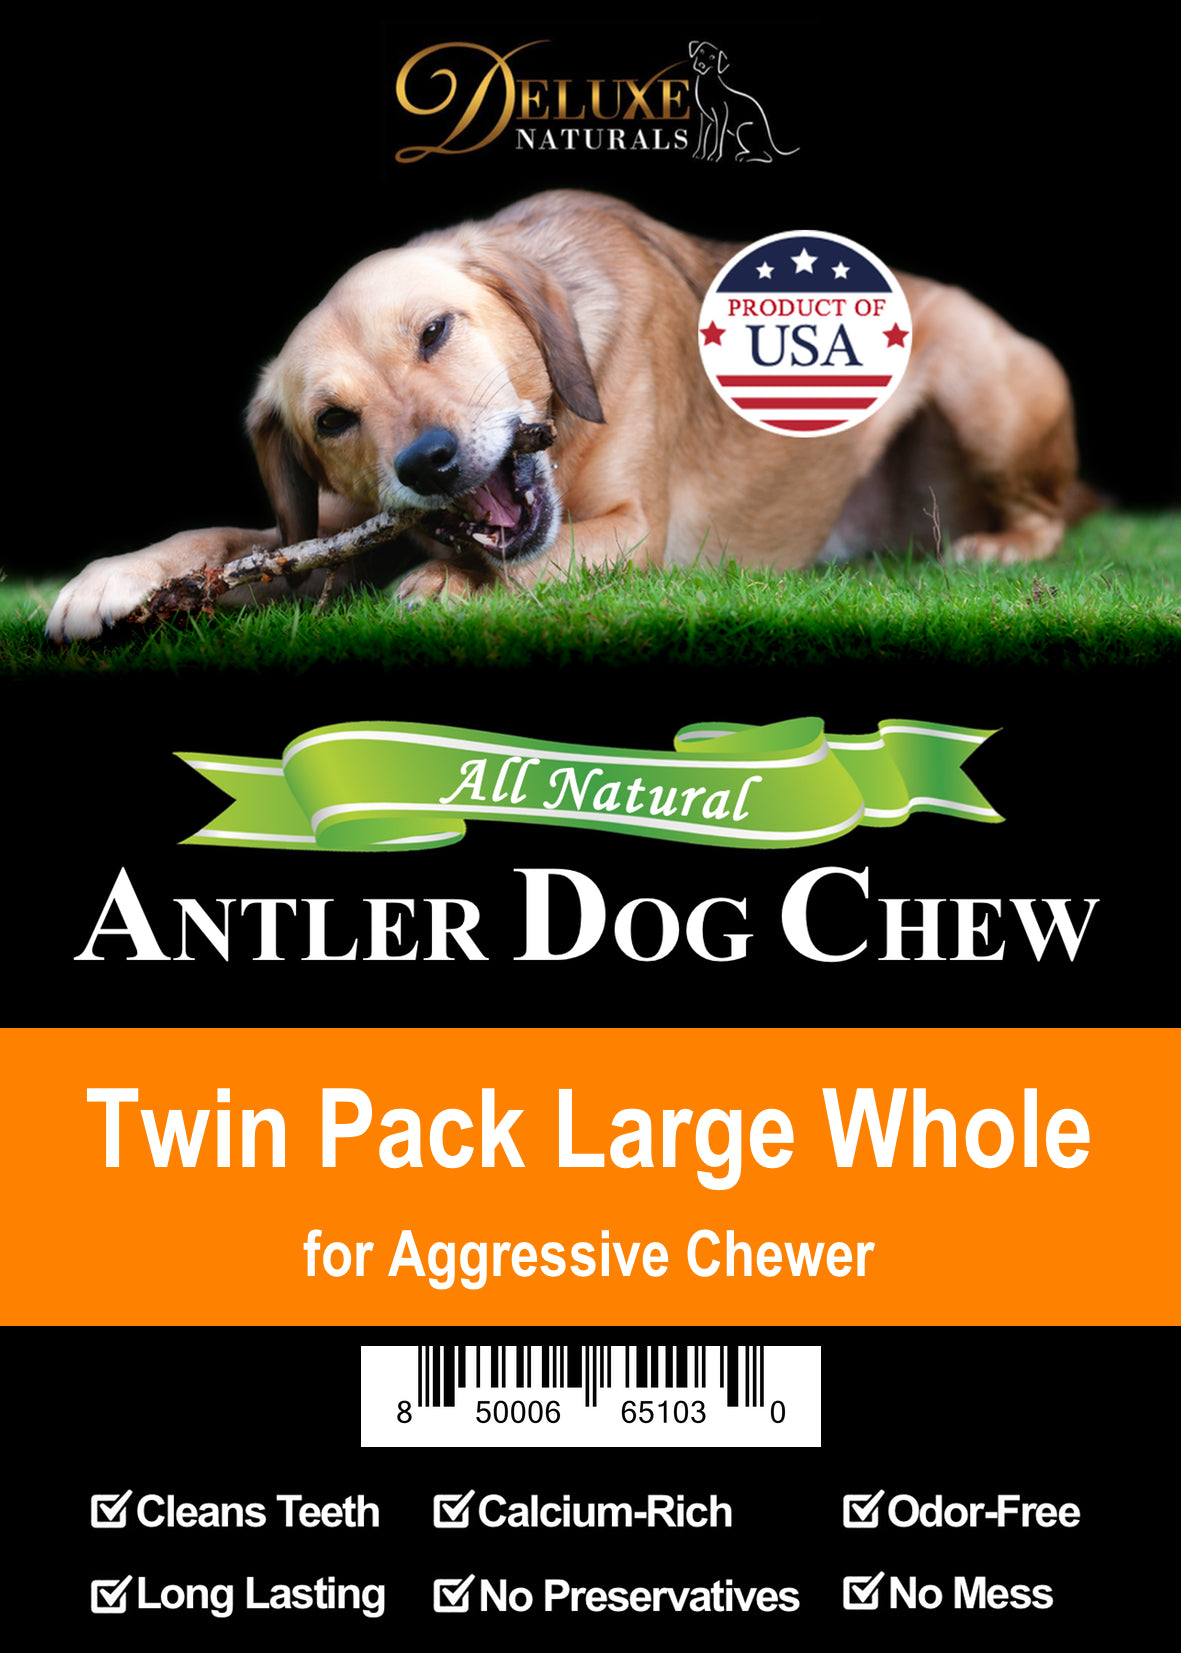 Deluxe Naturals Twin Pack Elk Antler Dog Chew - Large Whole